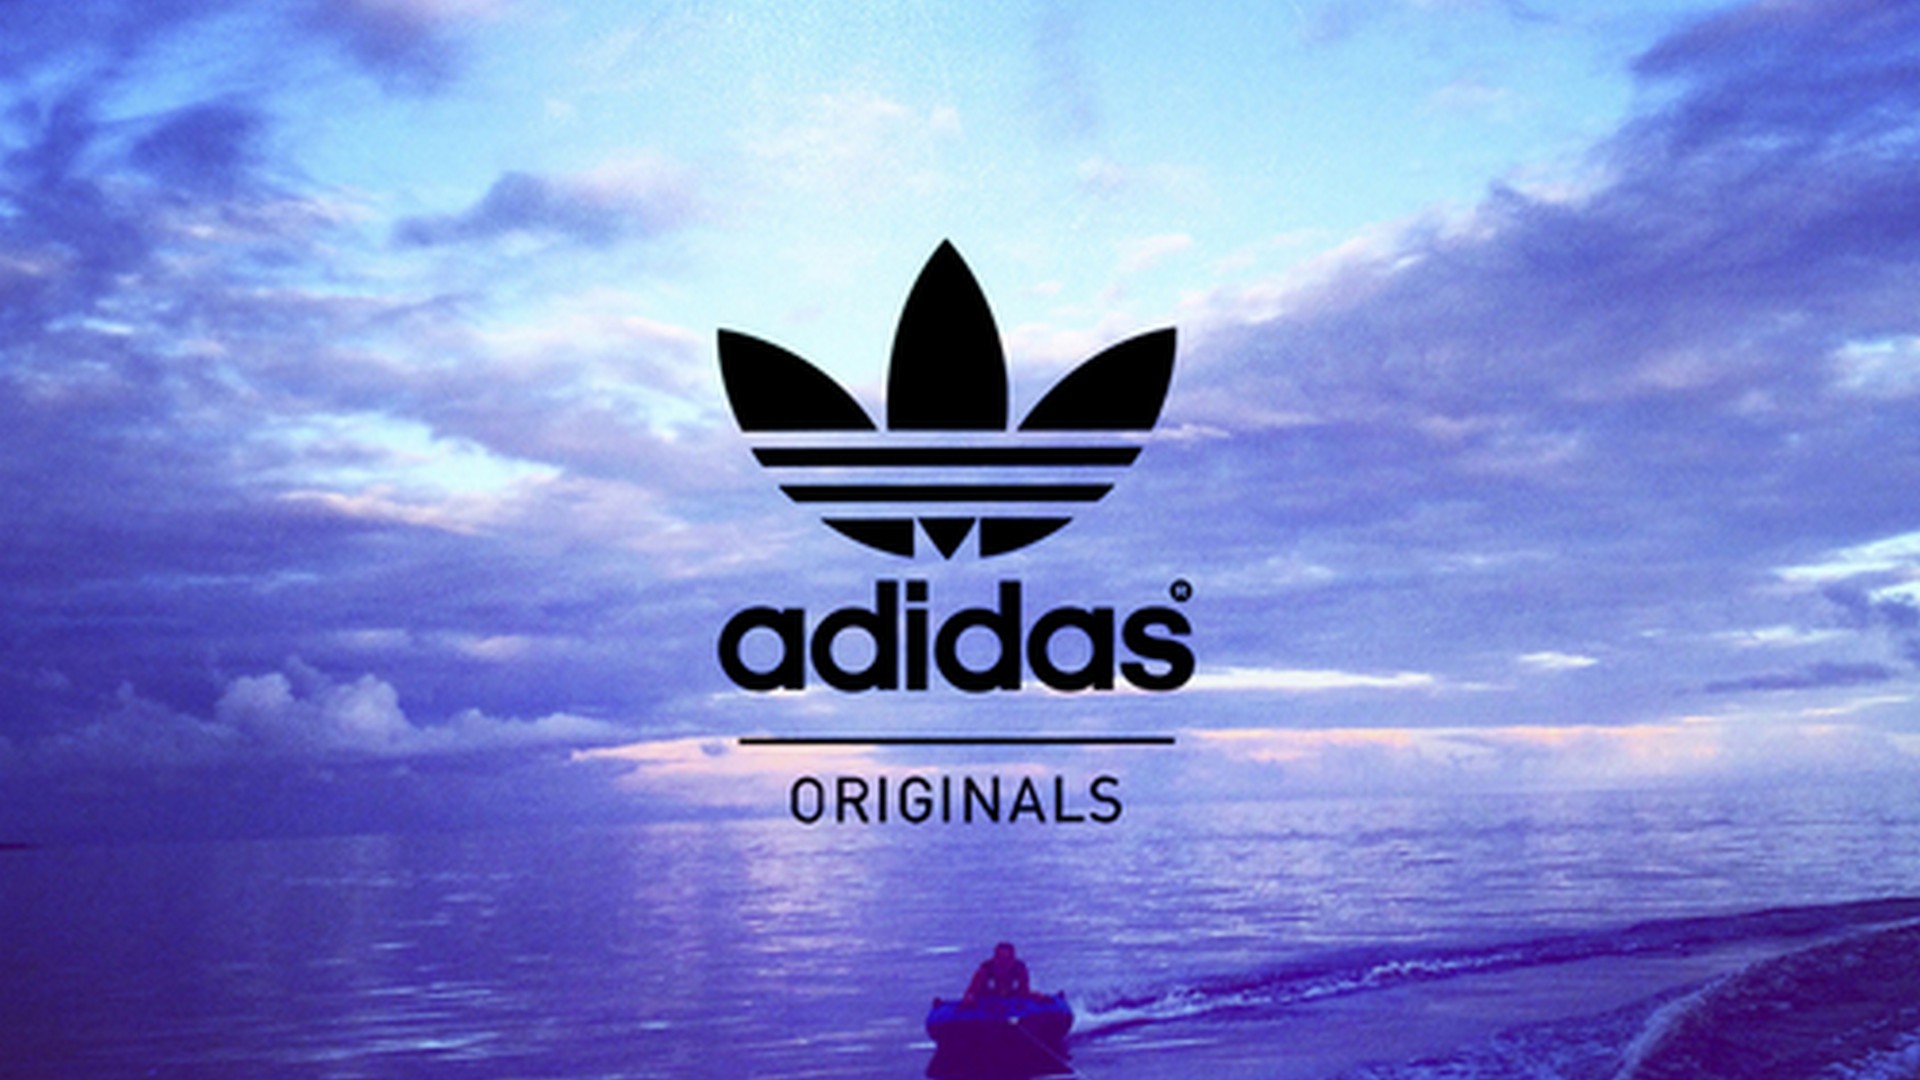 Wallpaper Adidas Desktop With high-resolution 1920X1080 pixel. You can use this wallpaper for your Windows and Mac OS computers as well as your Android and iPhone smartphones